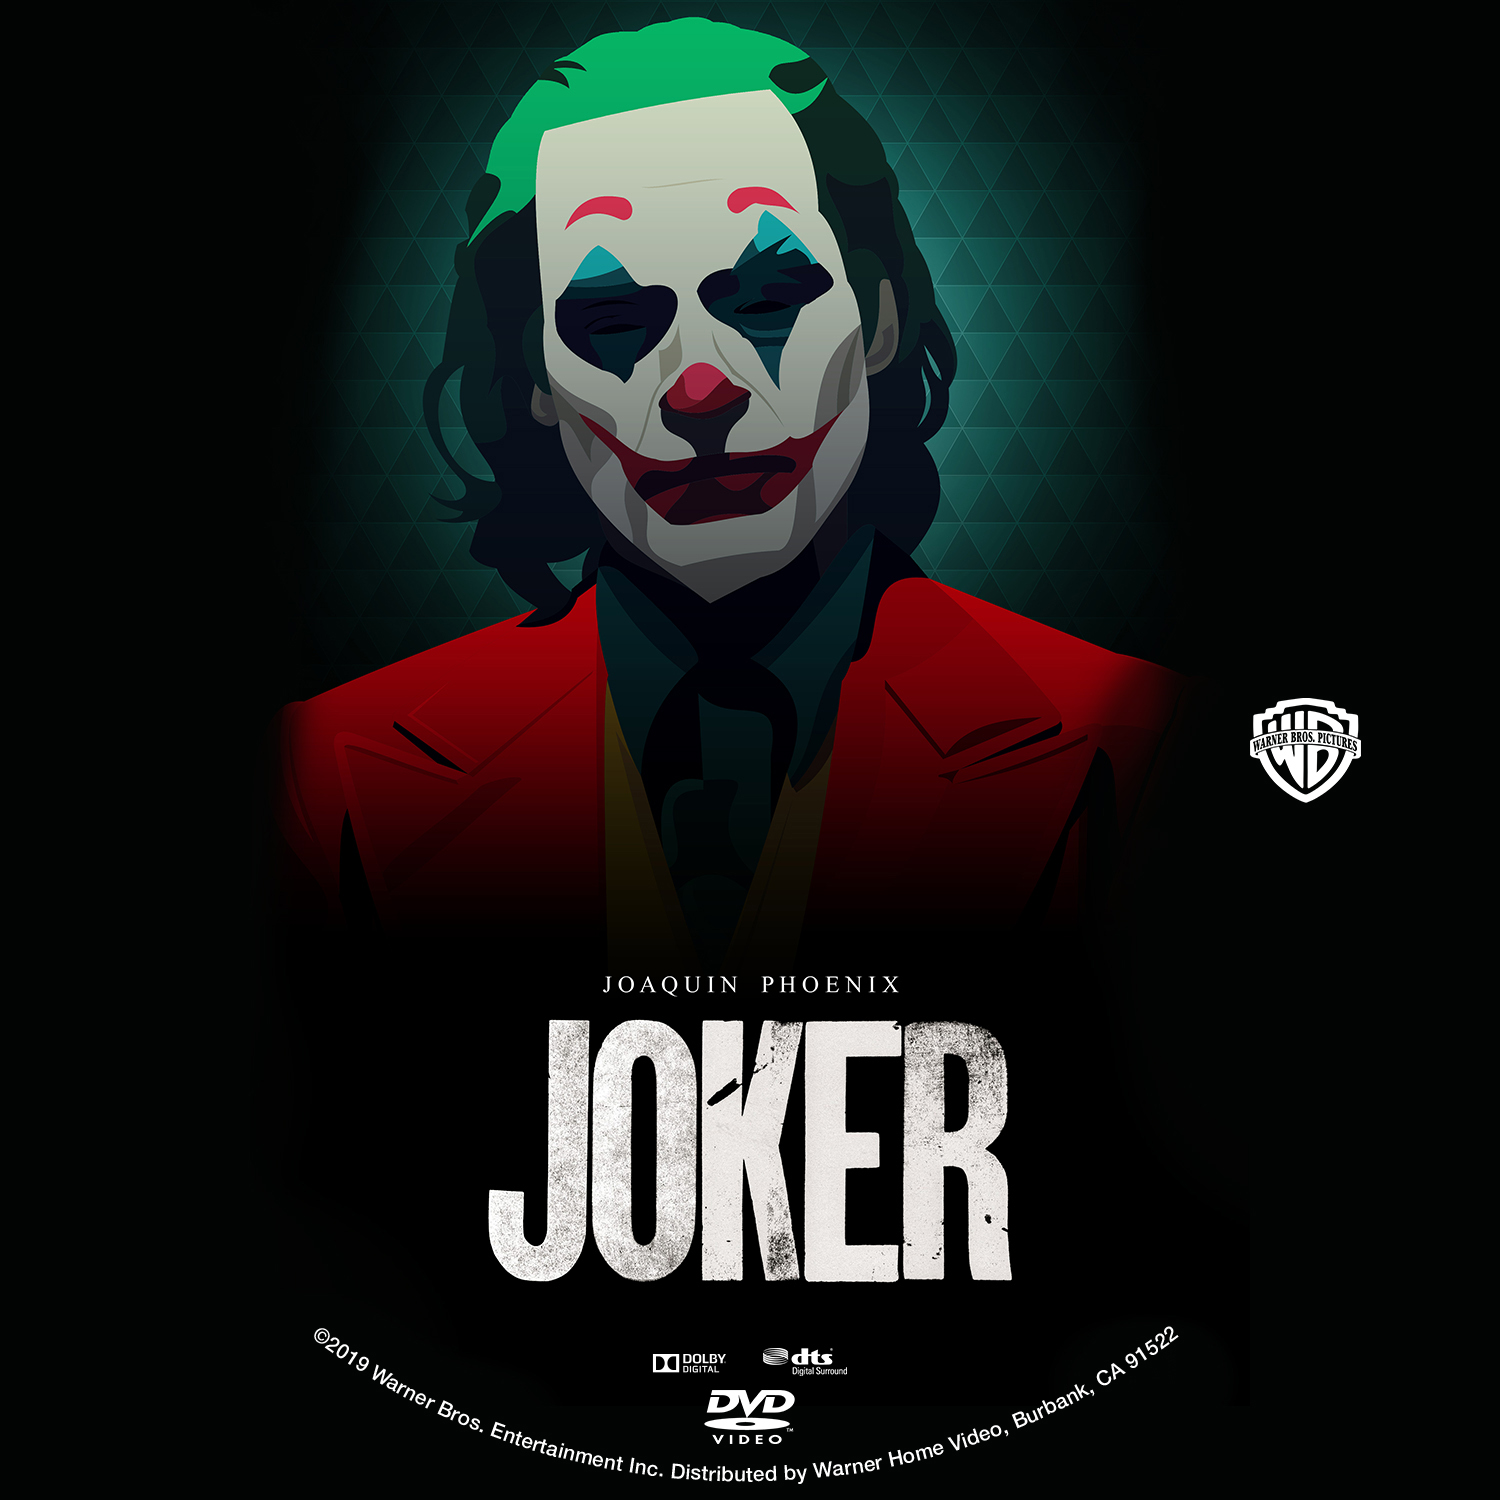 Joker Dvd Label Cover Addict Free Dvd Bluray Covers And Movie Posters